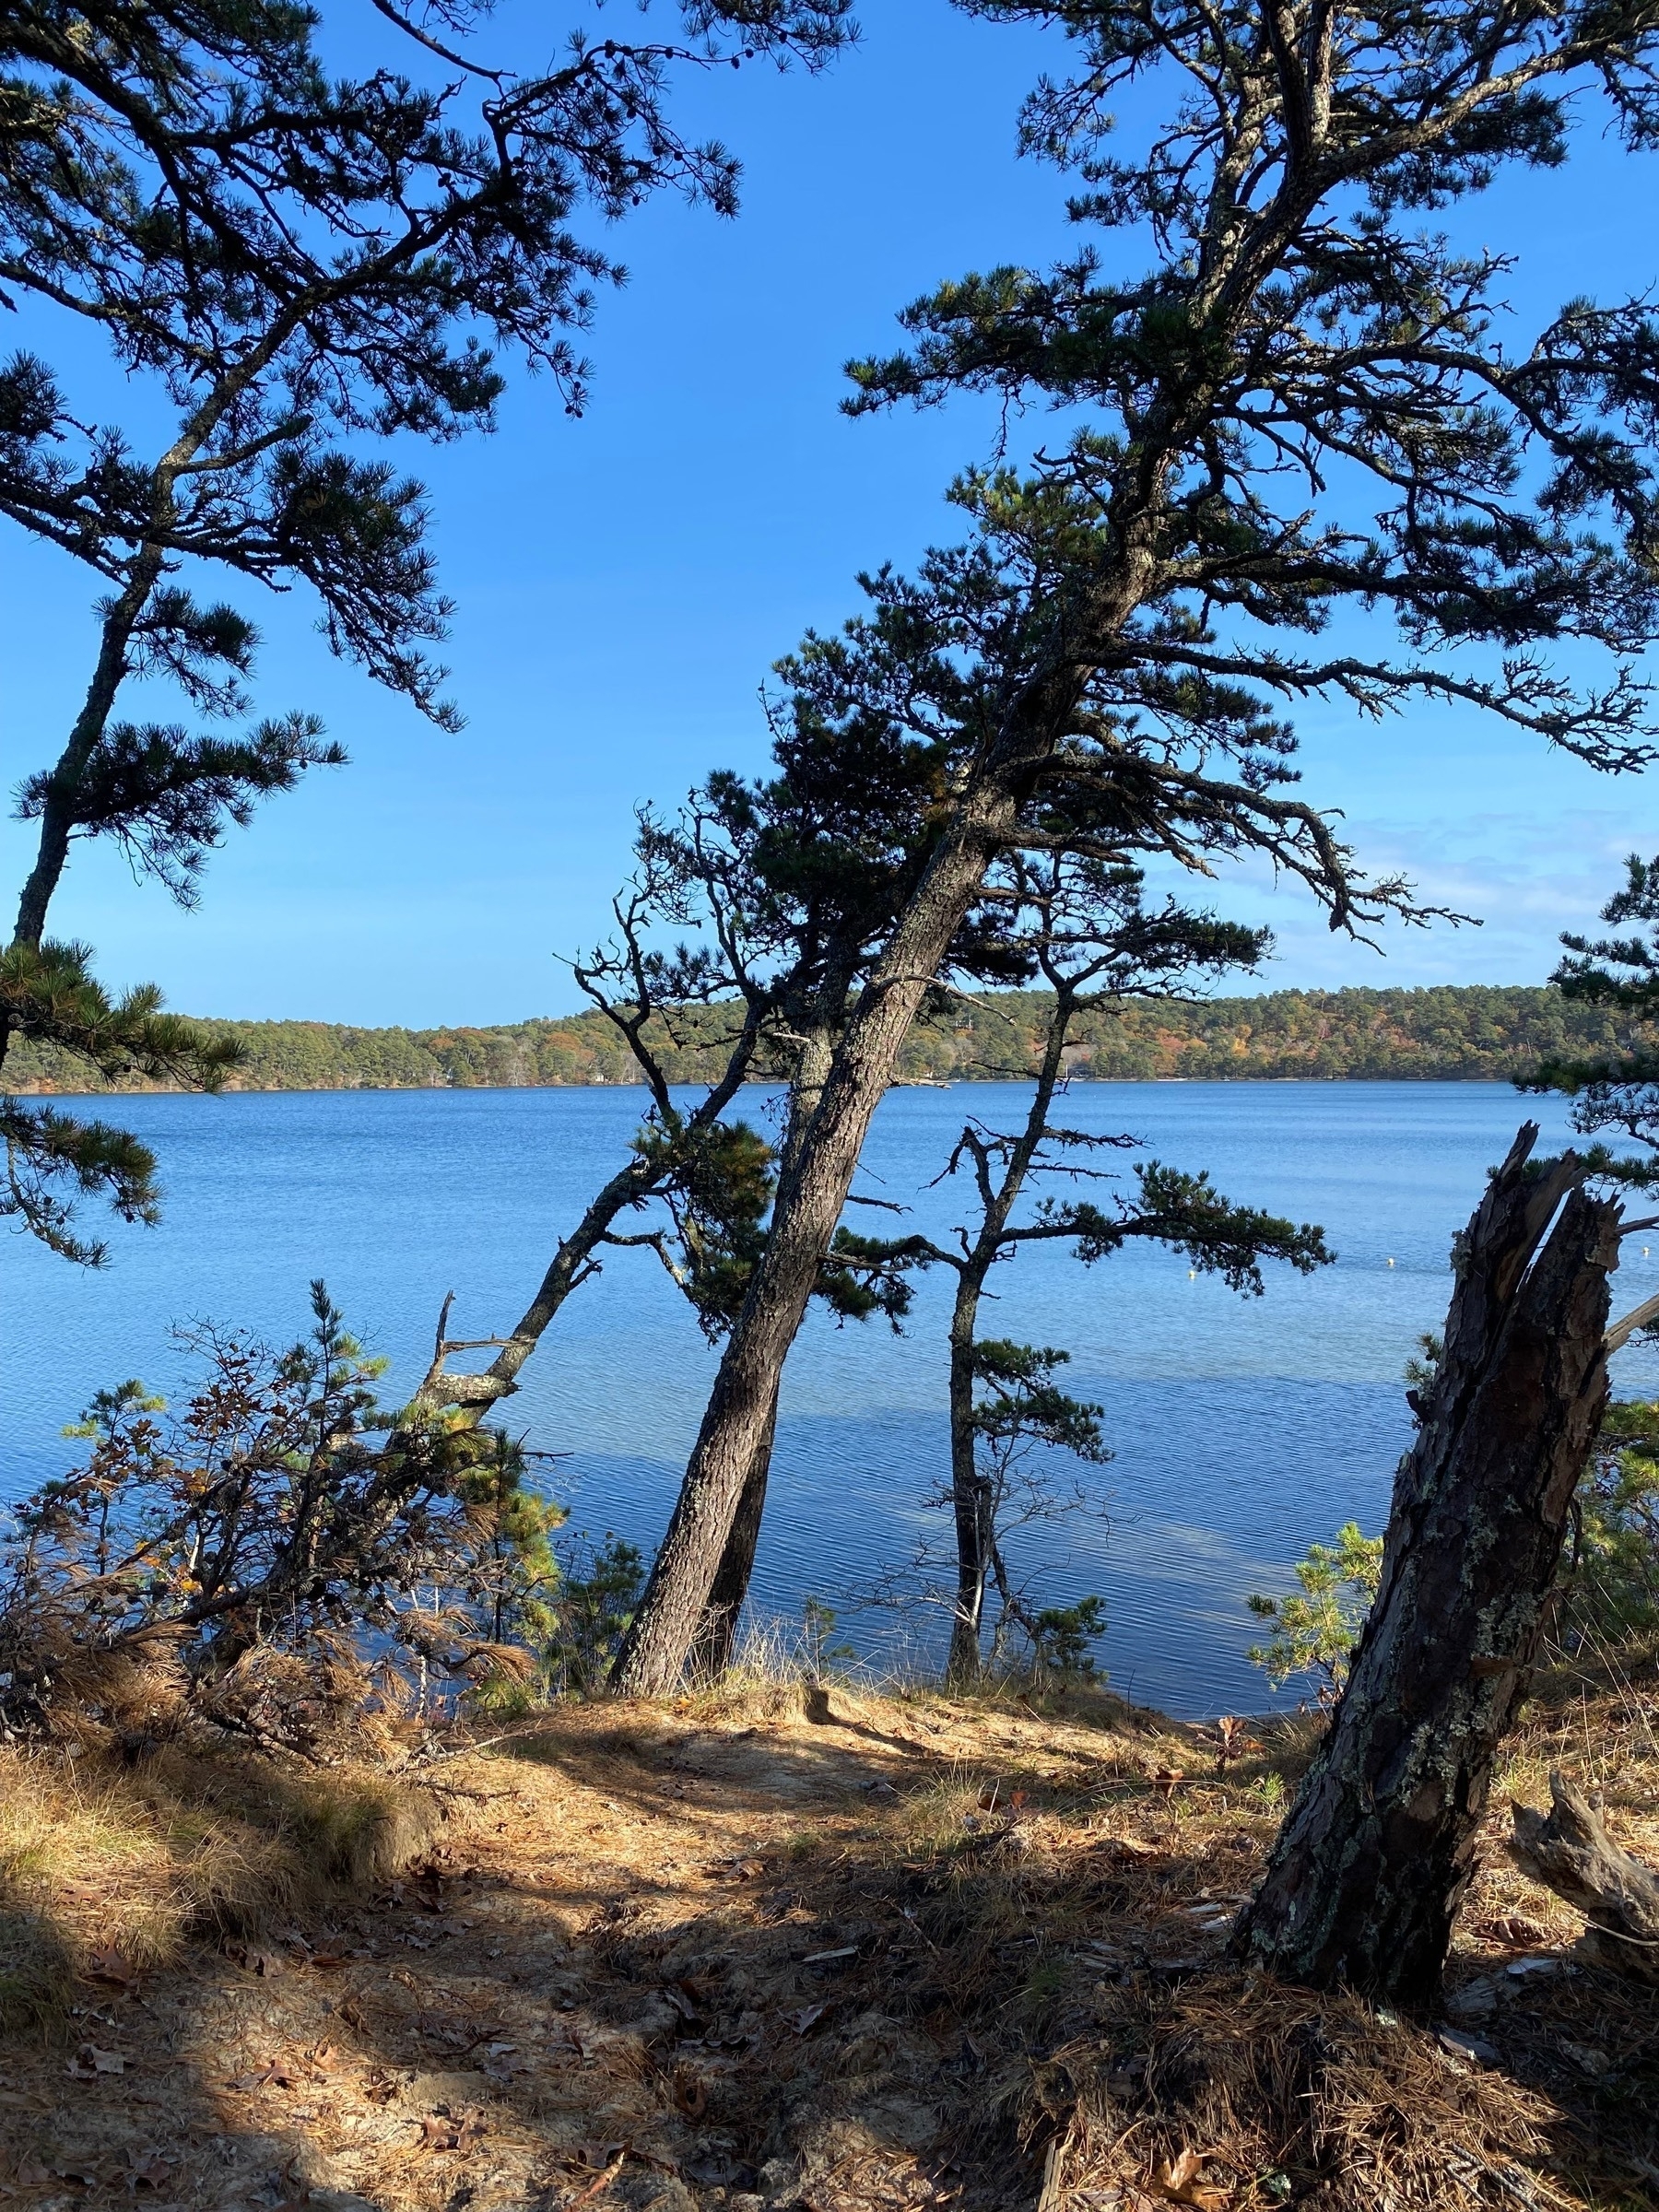 View of a lake with pine trees leaning to the right on the near bank.